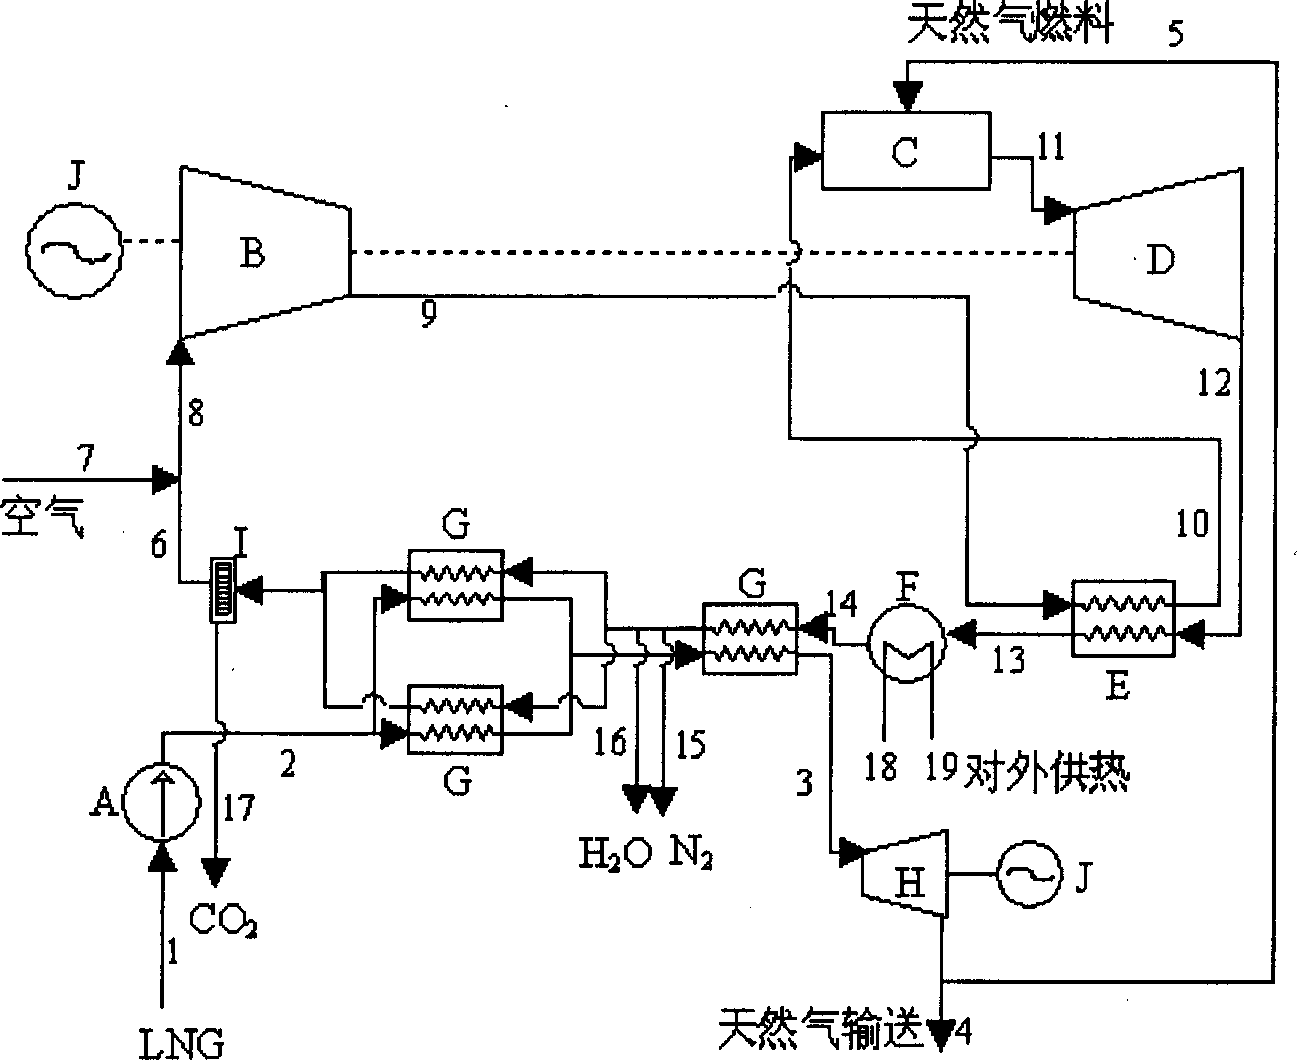 Gas turbine generating system and flow by cooling liquefied natural gas to separate carbon dioxide